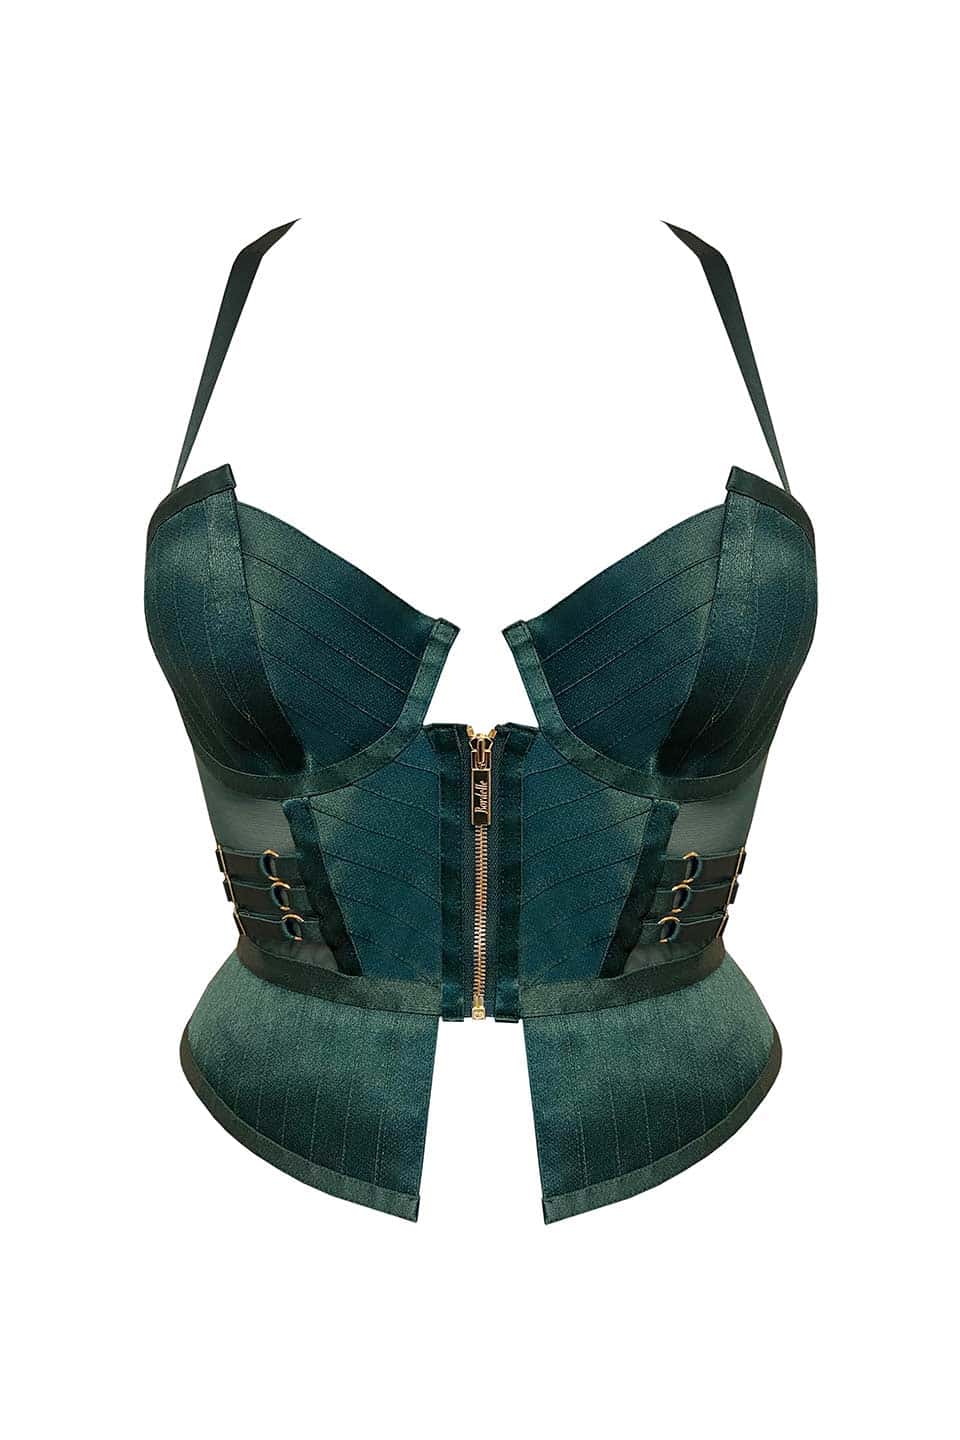 Shop online trendy Green Bodies & corsets from Atelier Bordelle Fashion designer. Product gallery 1